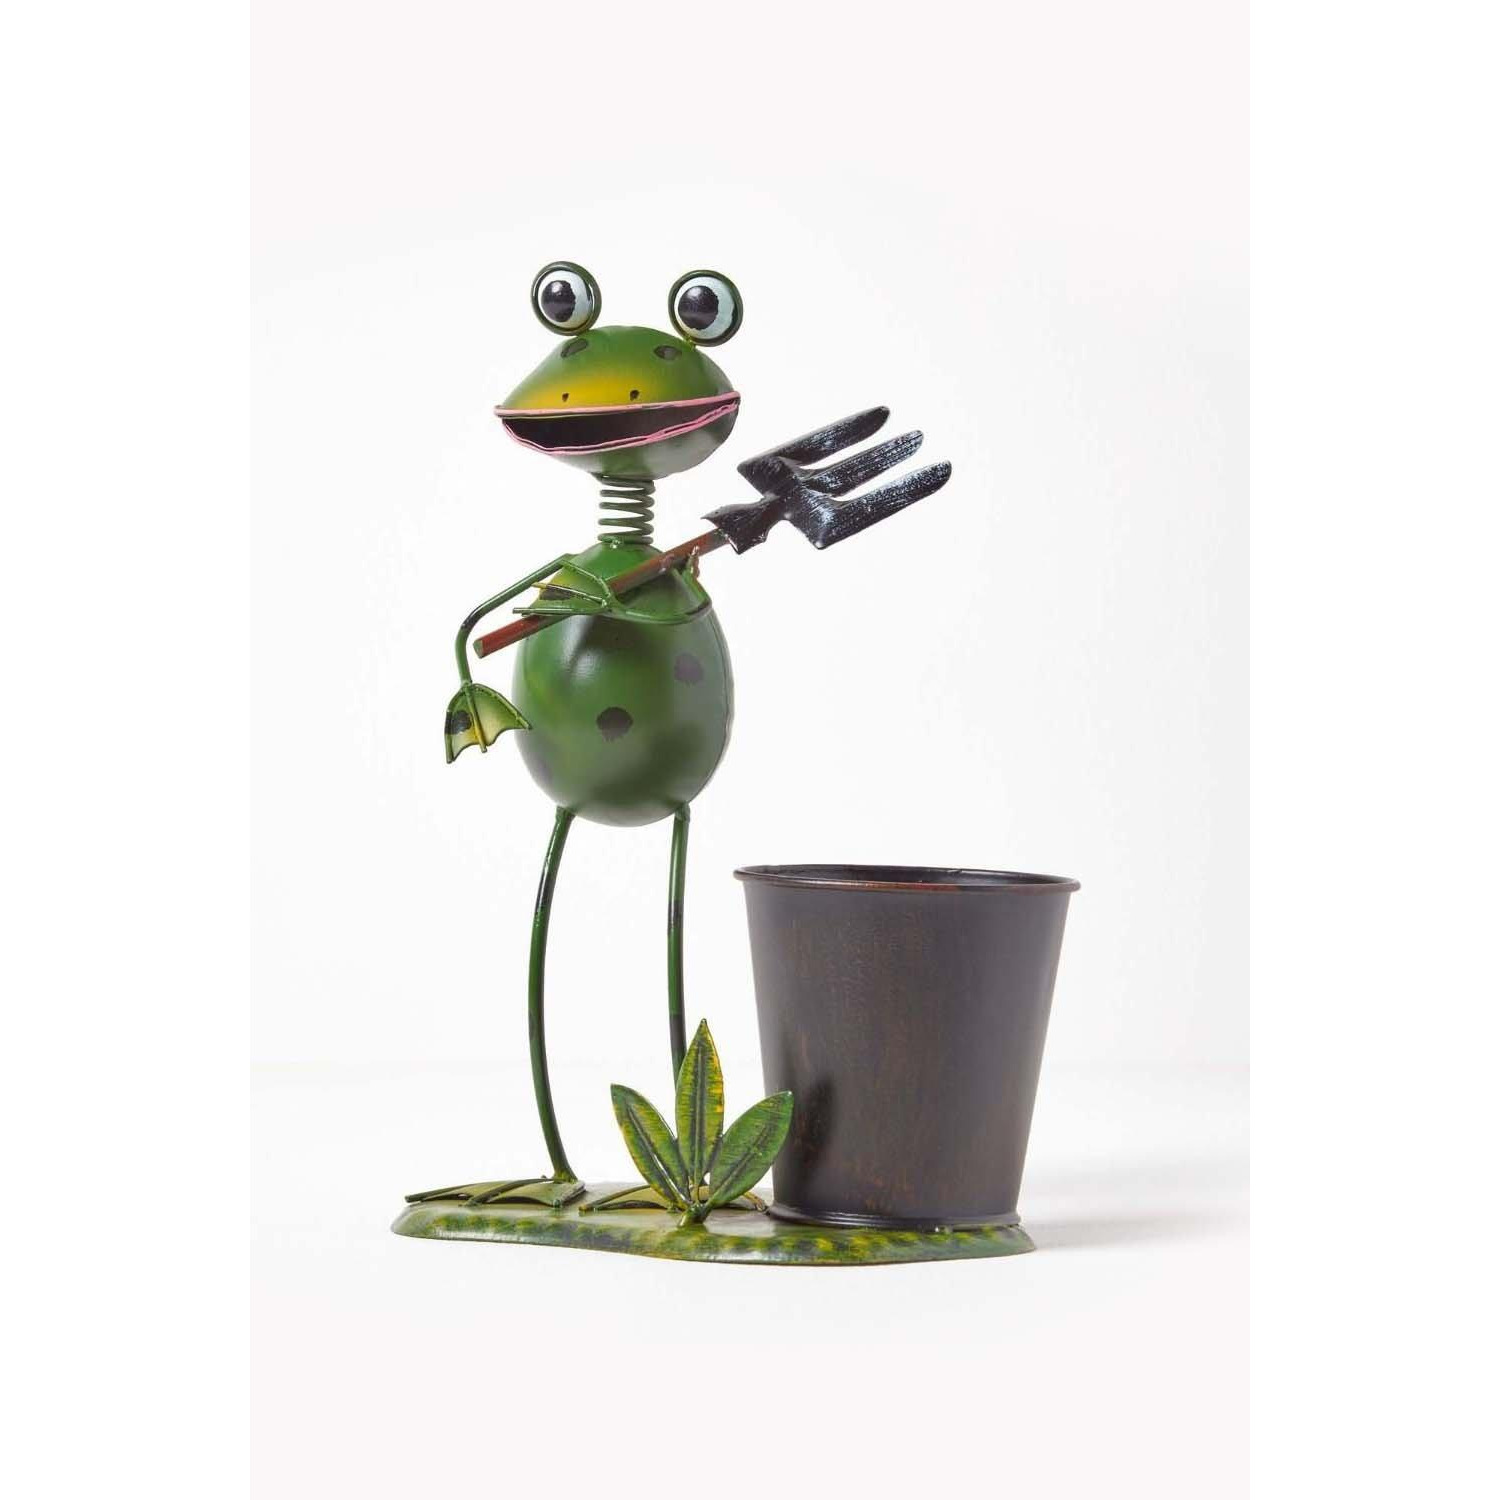 Metal Frog with Garden Fork and Flower Pot, 28 cm Tall - image 1